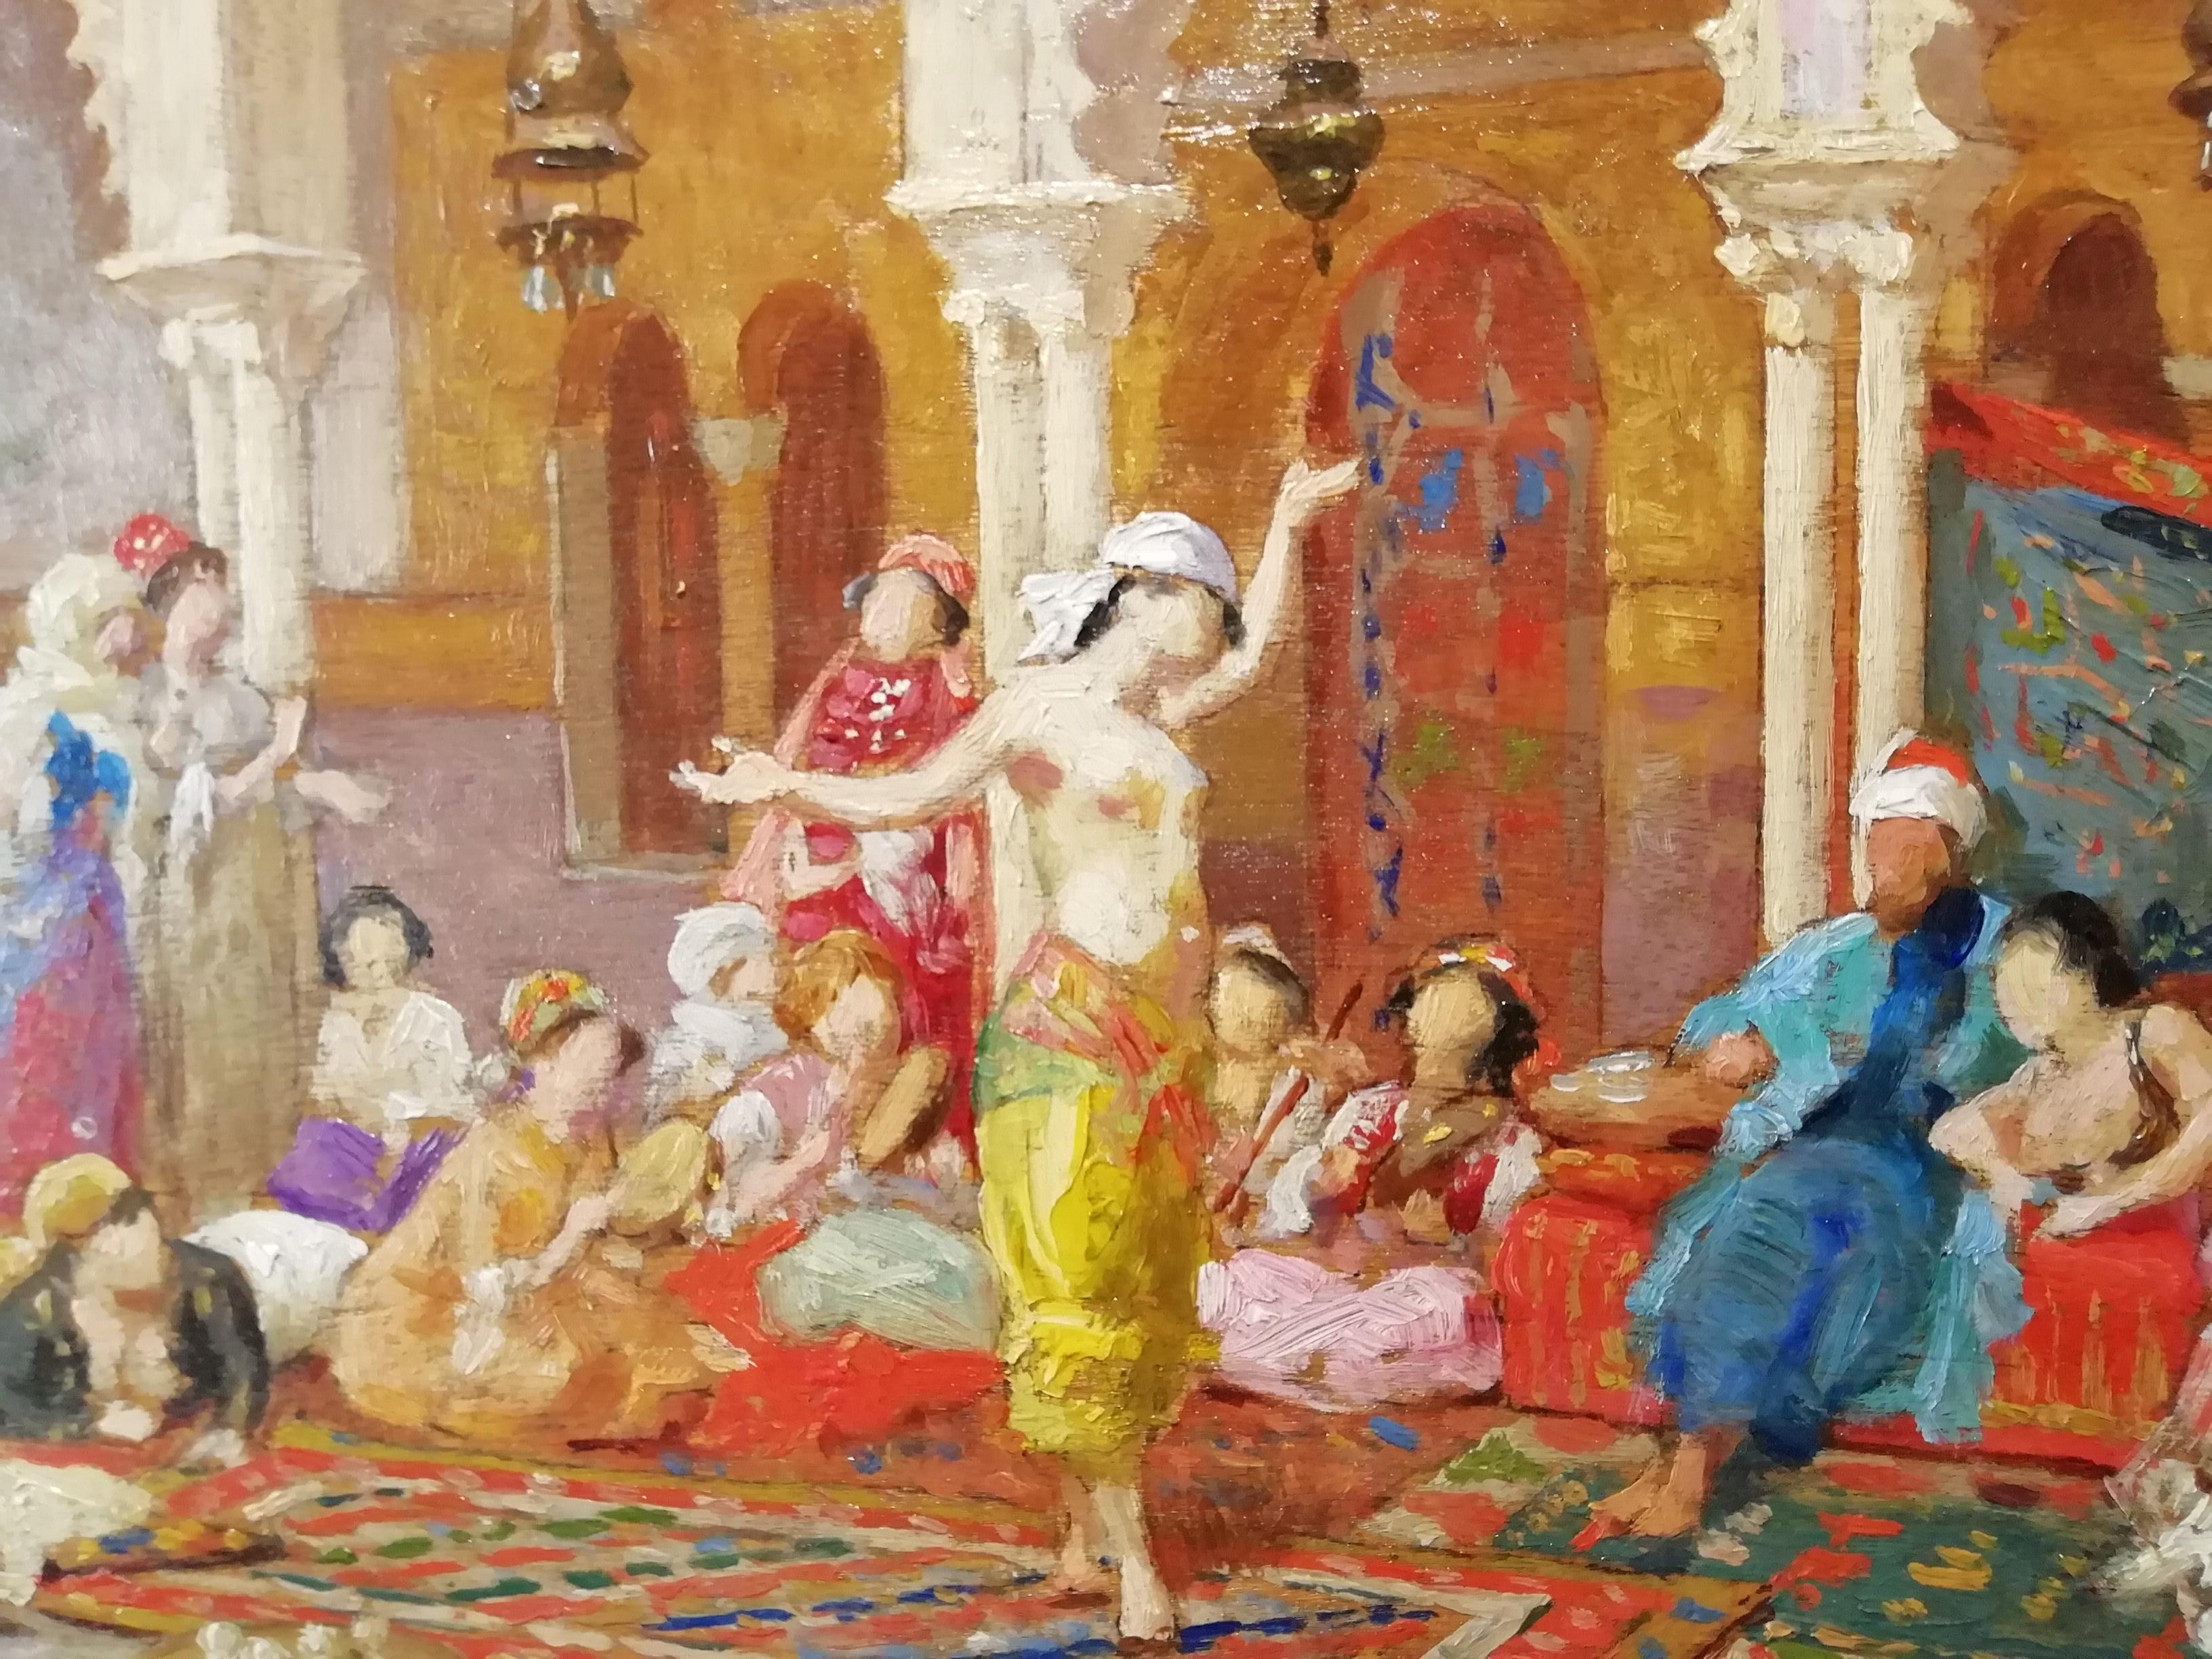 Harem, Giulio Rosati Oil on Wood Orientalism 19th Century Italian Painting In Good Condition For Sale In Rome, Italy